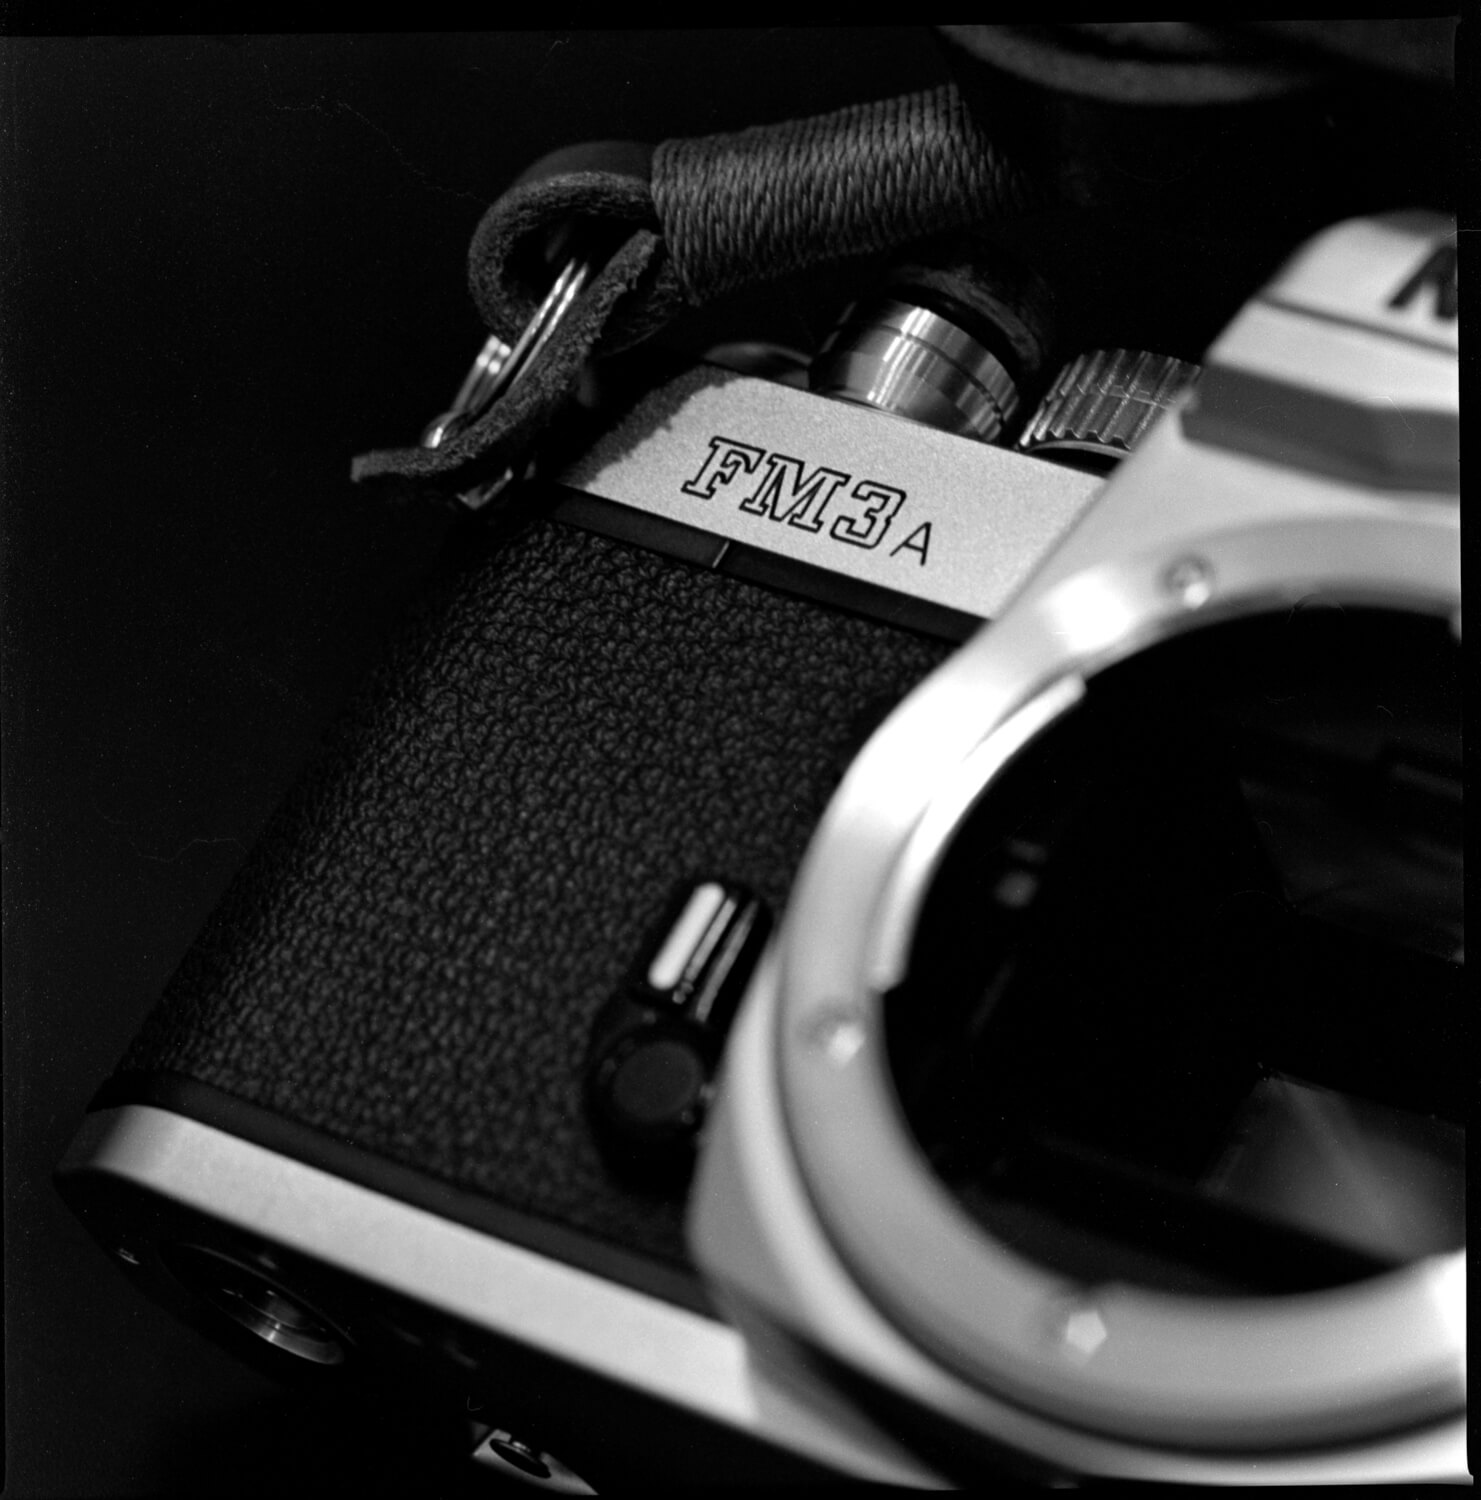 Photography: Danger close – Shot on ILFORD Delta 100 Professional at EI 200 (120 Format)